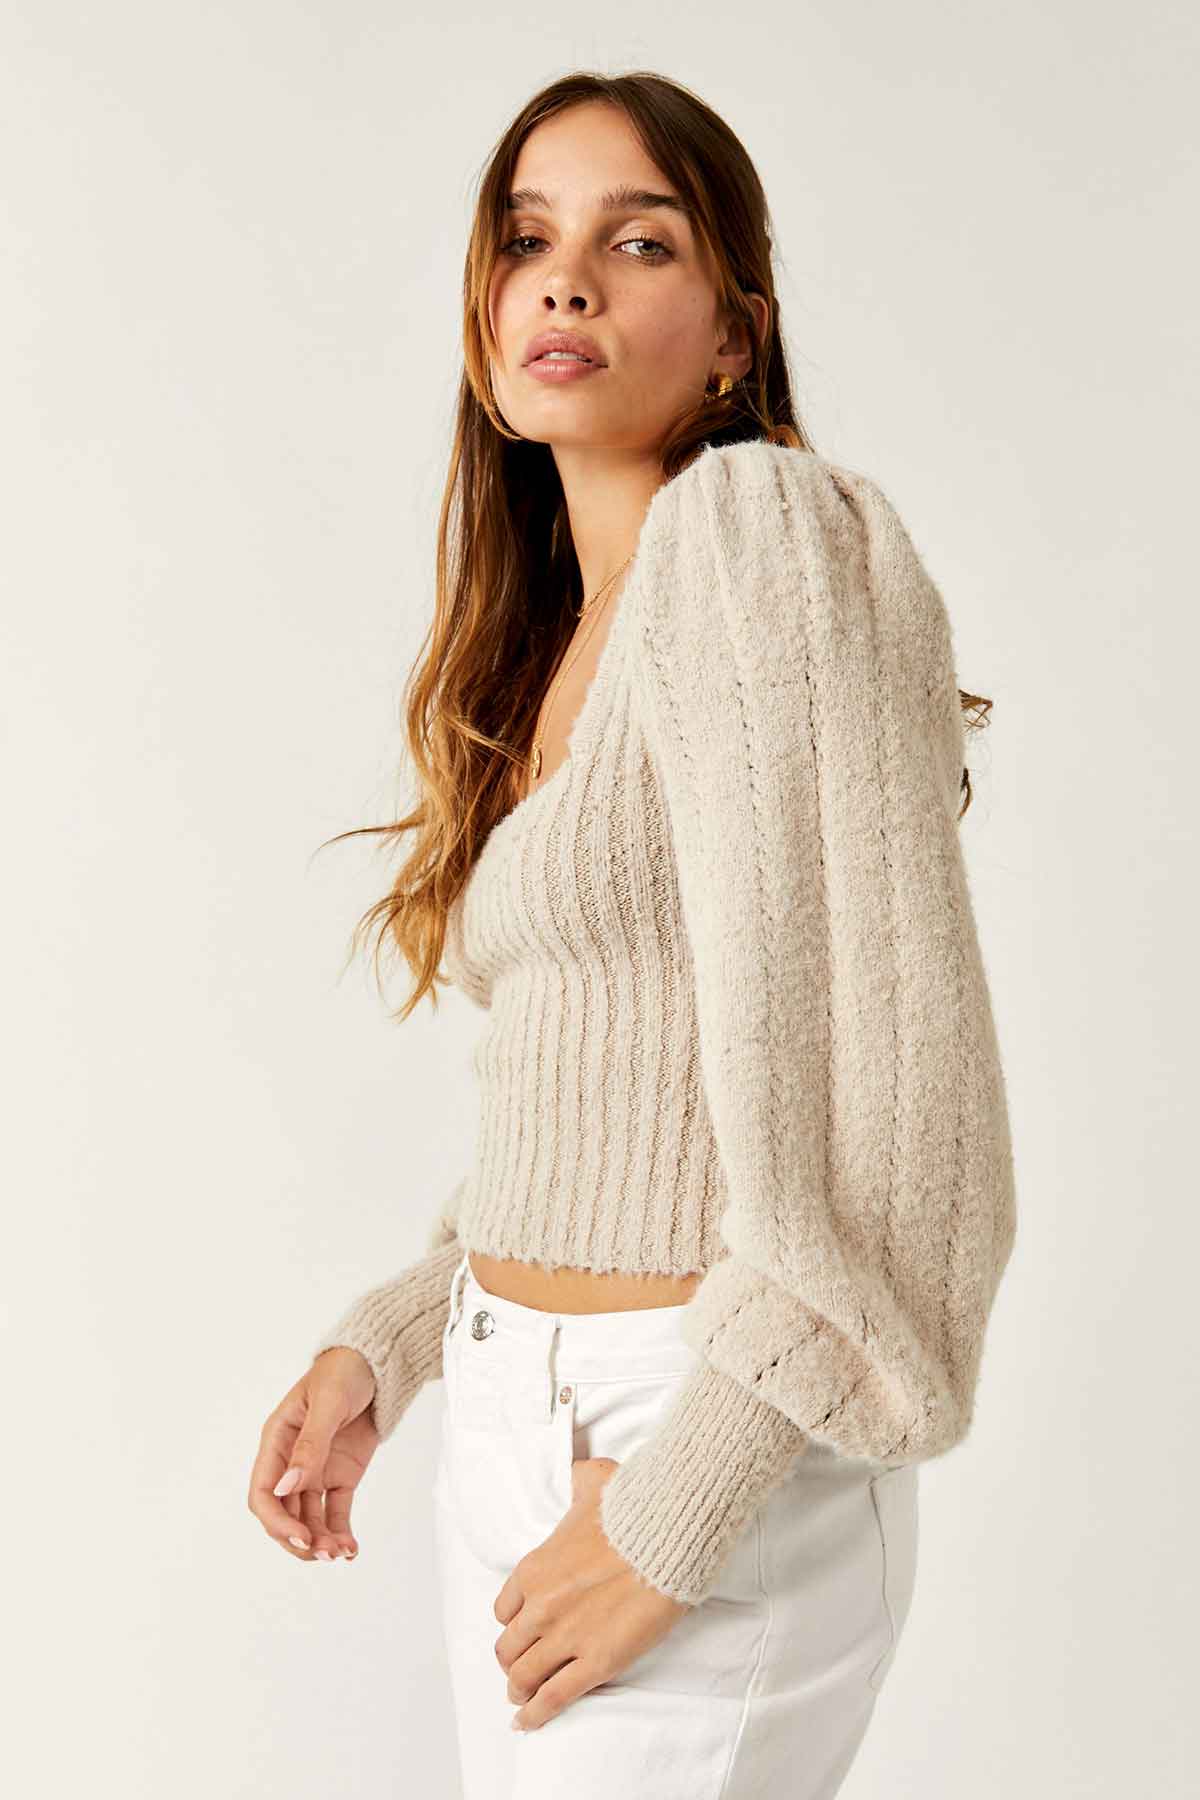 Free People - Katie Pullover - Sand Dollar Combo - Side